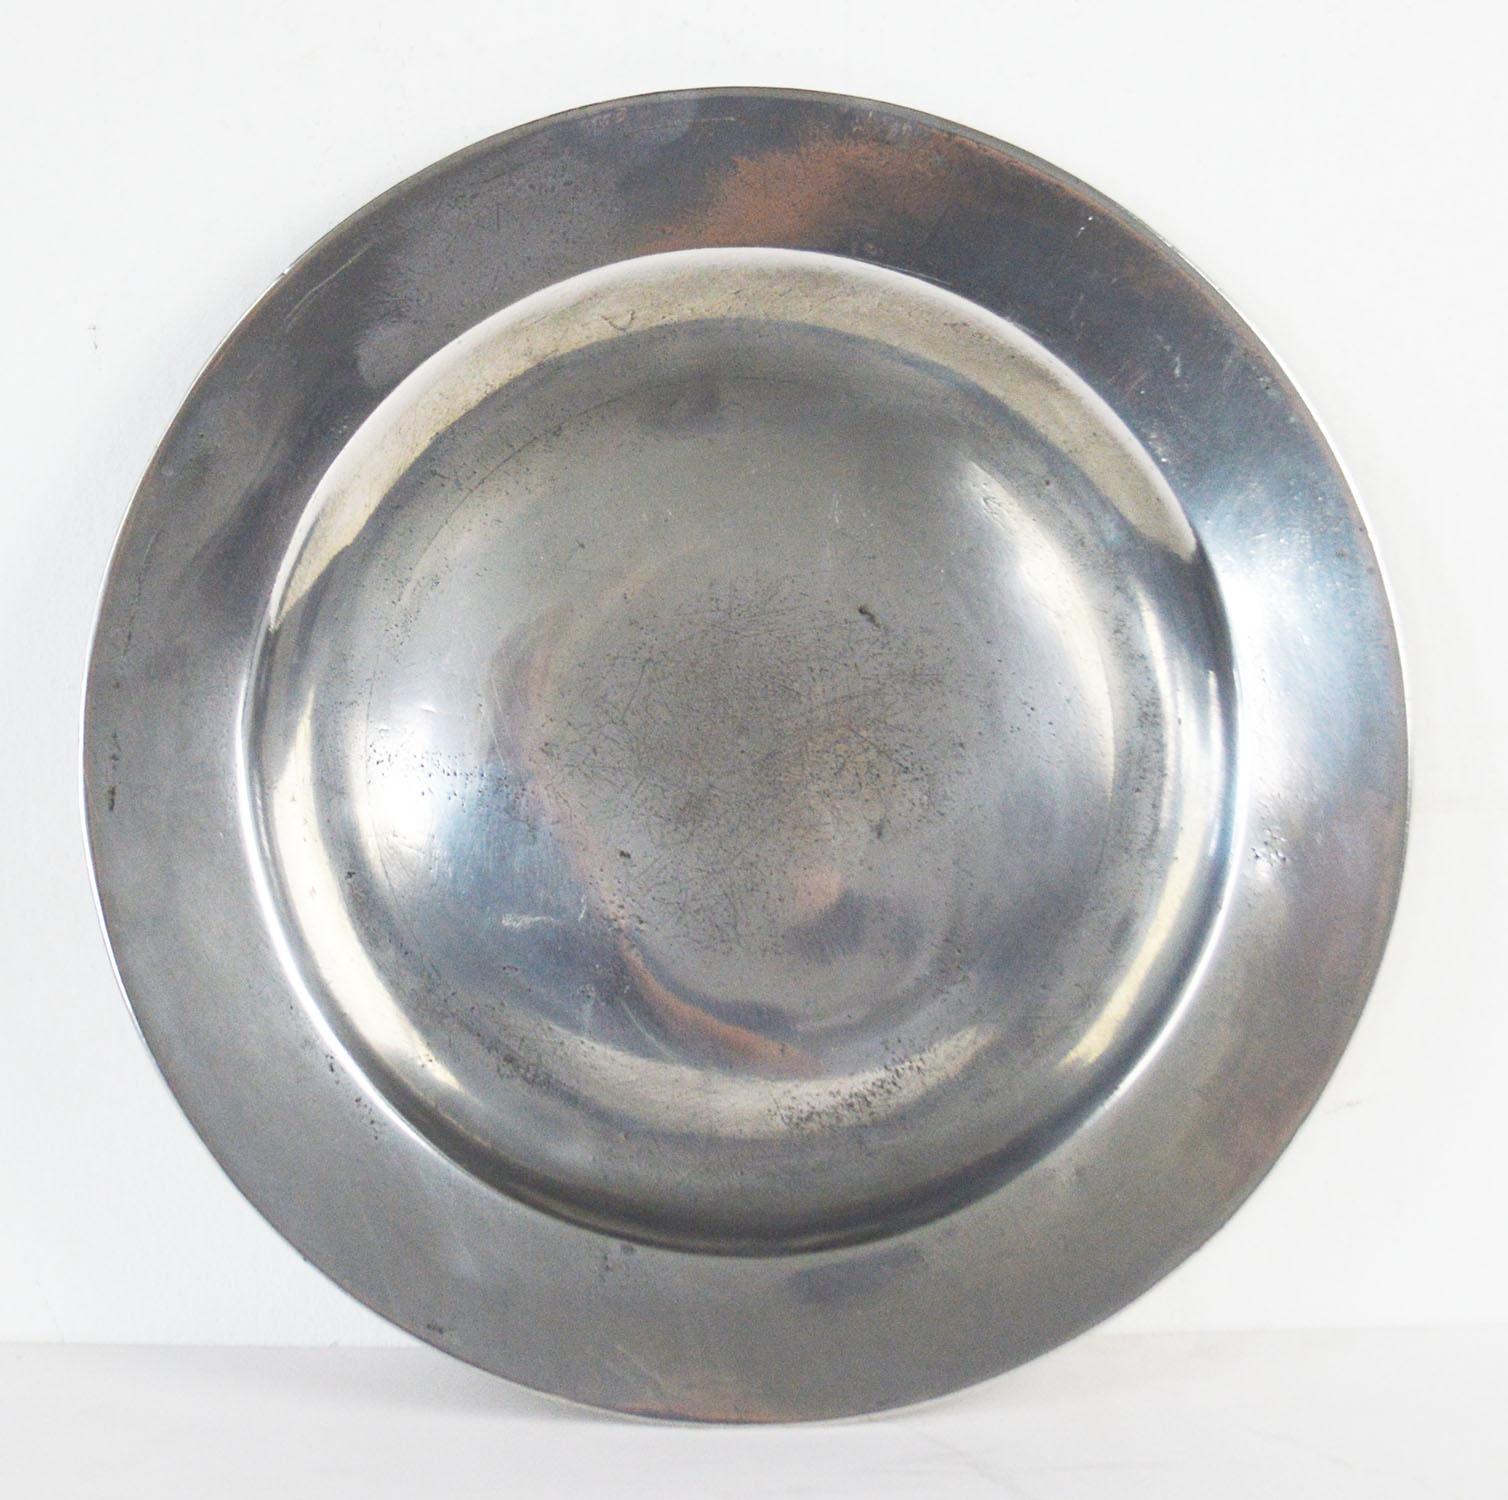 Wonderful highly polished pewter plates

English, late 18th century, London maker, measures: 9.5 inches.

The pewter has been polished to its original shine to imitate polished silver. It was known as the Poor Man's Silver.

Rubbed touch marks